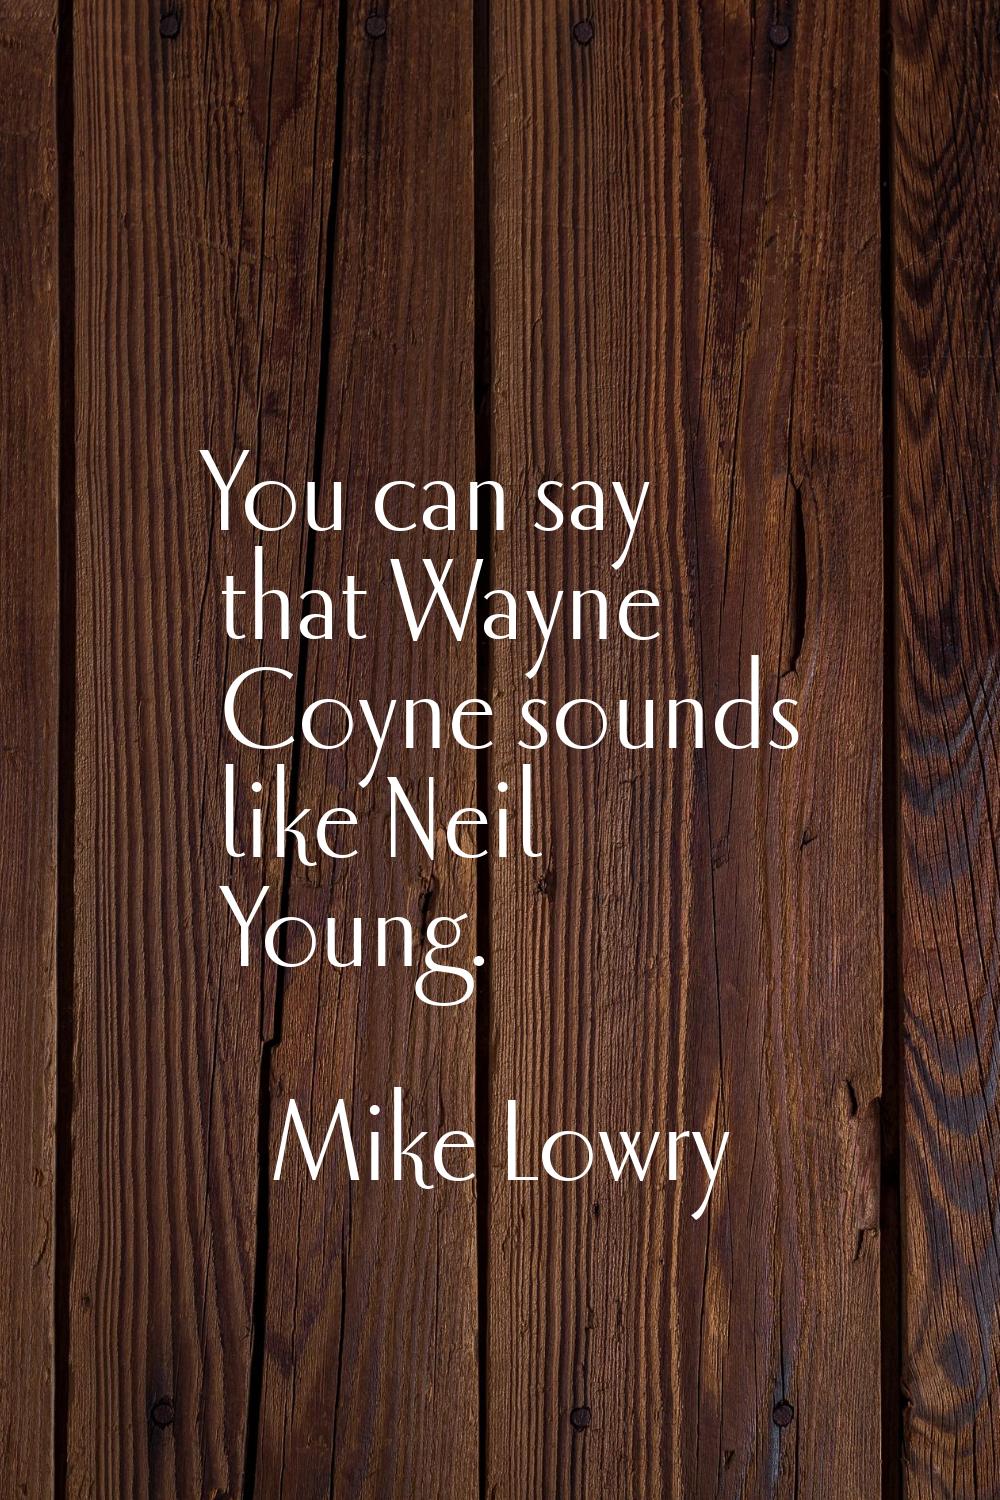 You can say that Wayne Coyne sounds like Neil Young.